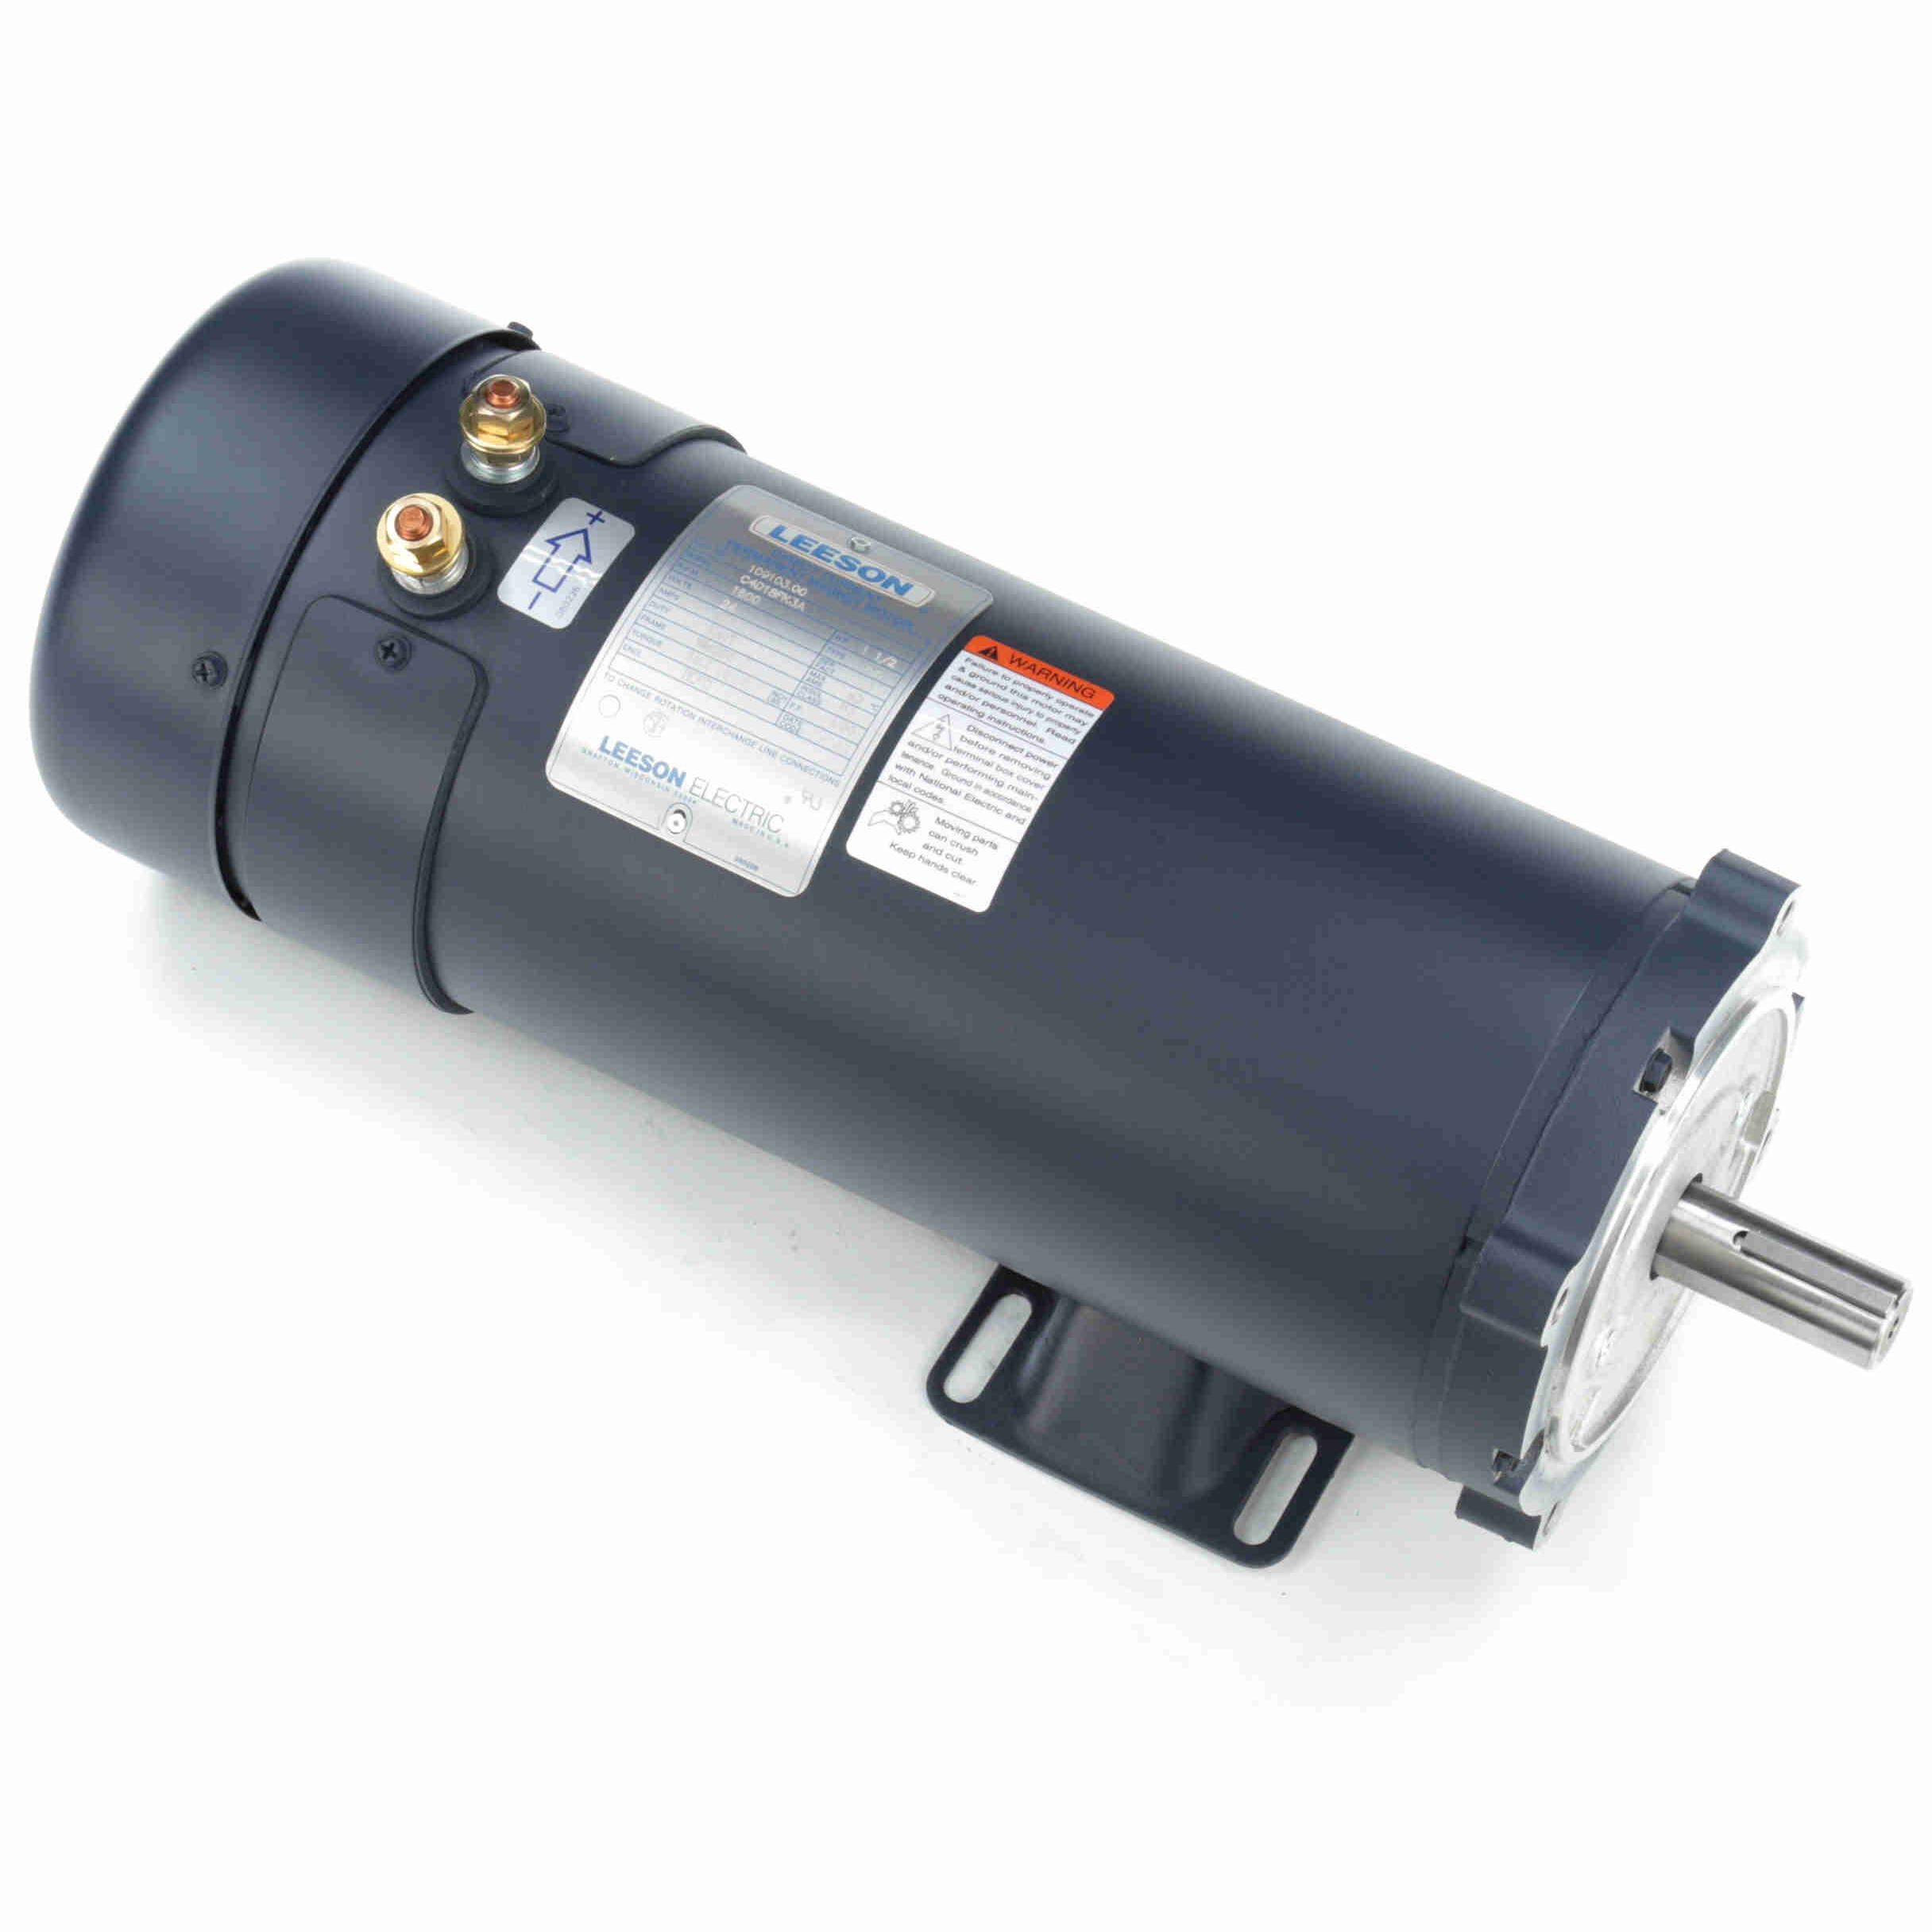 109103.00 Leeson 1.5HP Low Voltage DC Electric Motor, 1800RPM 4